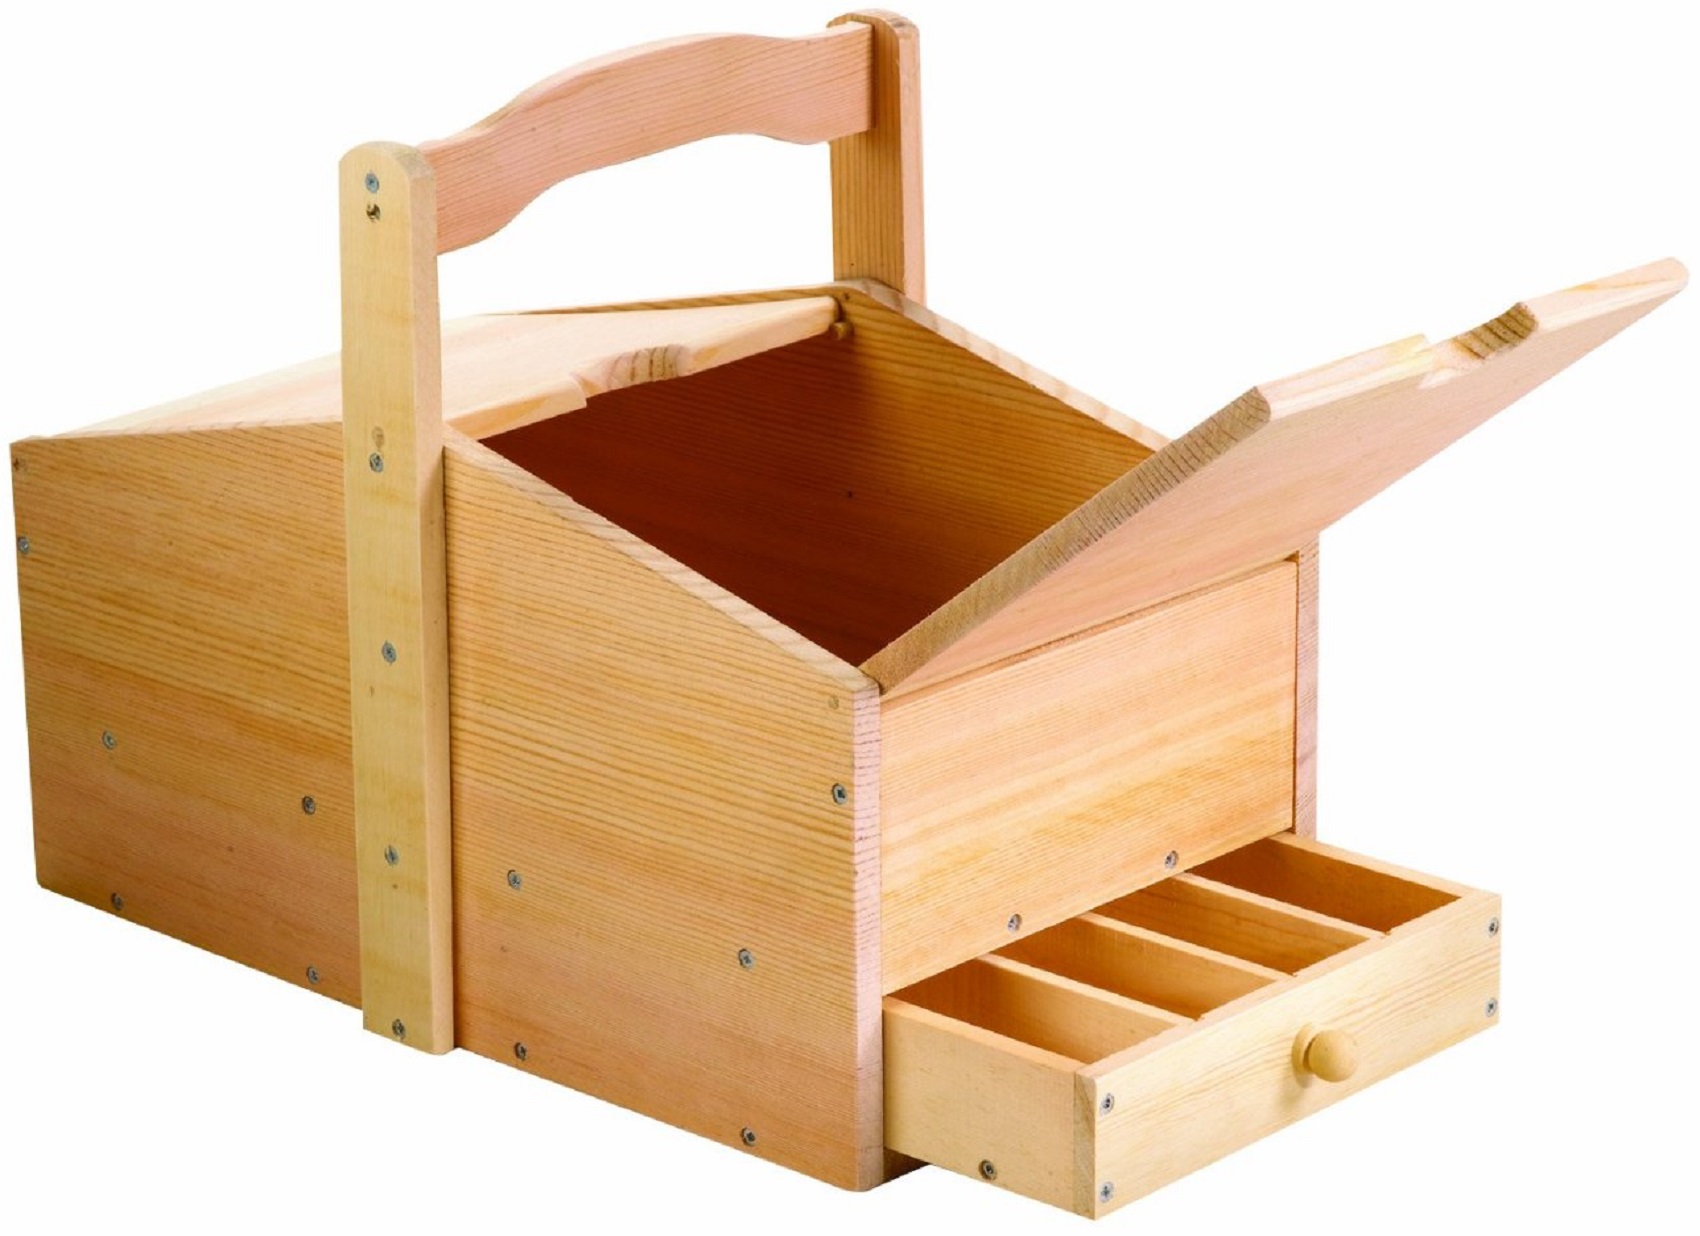  toolbox, Build Portable Picnic Table, Plans To Build Bed With Storage